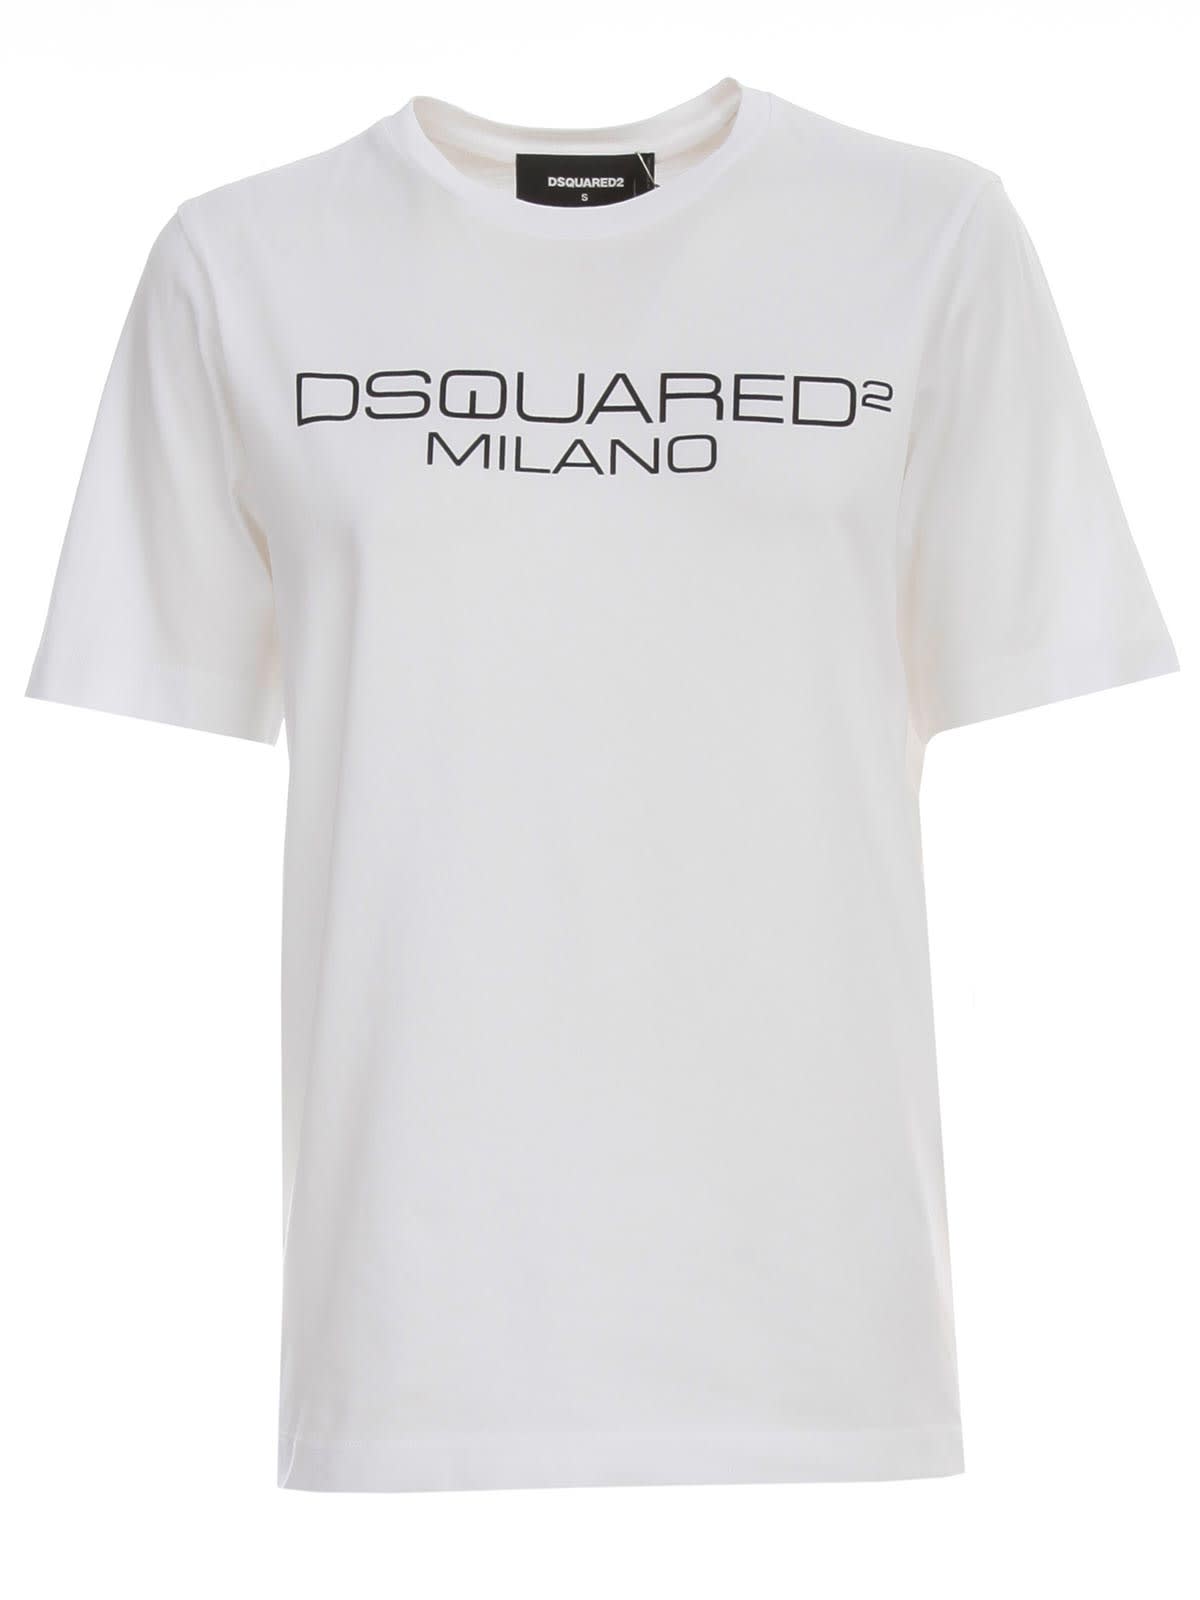 DSQUARED2 RENNY FIT T-SHIRT S/S WASH W/WRITTEN,11223935